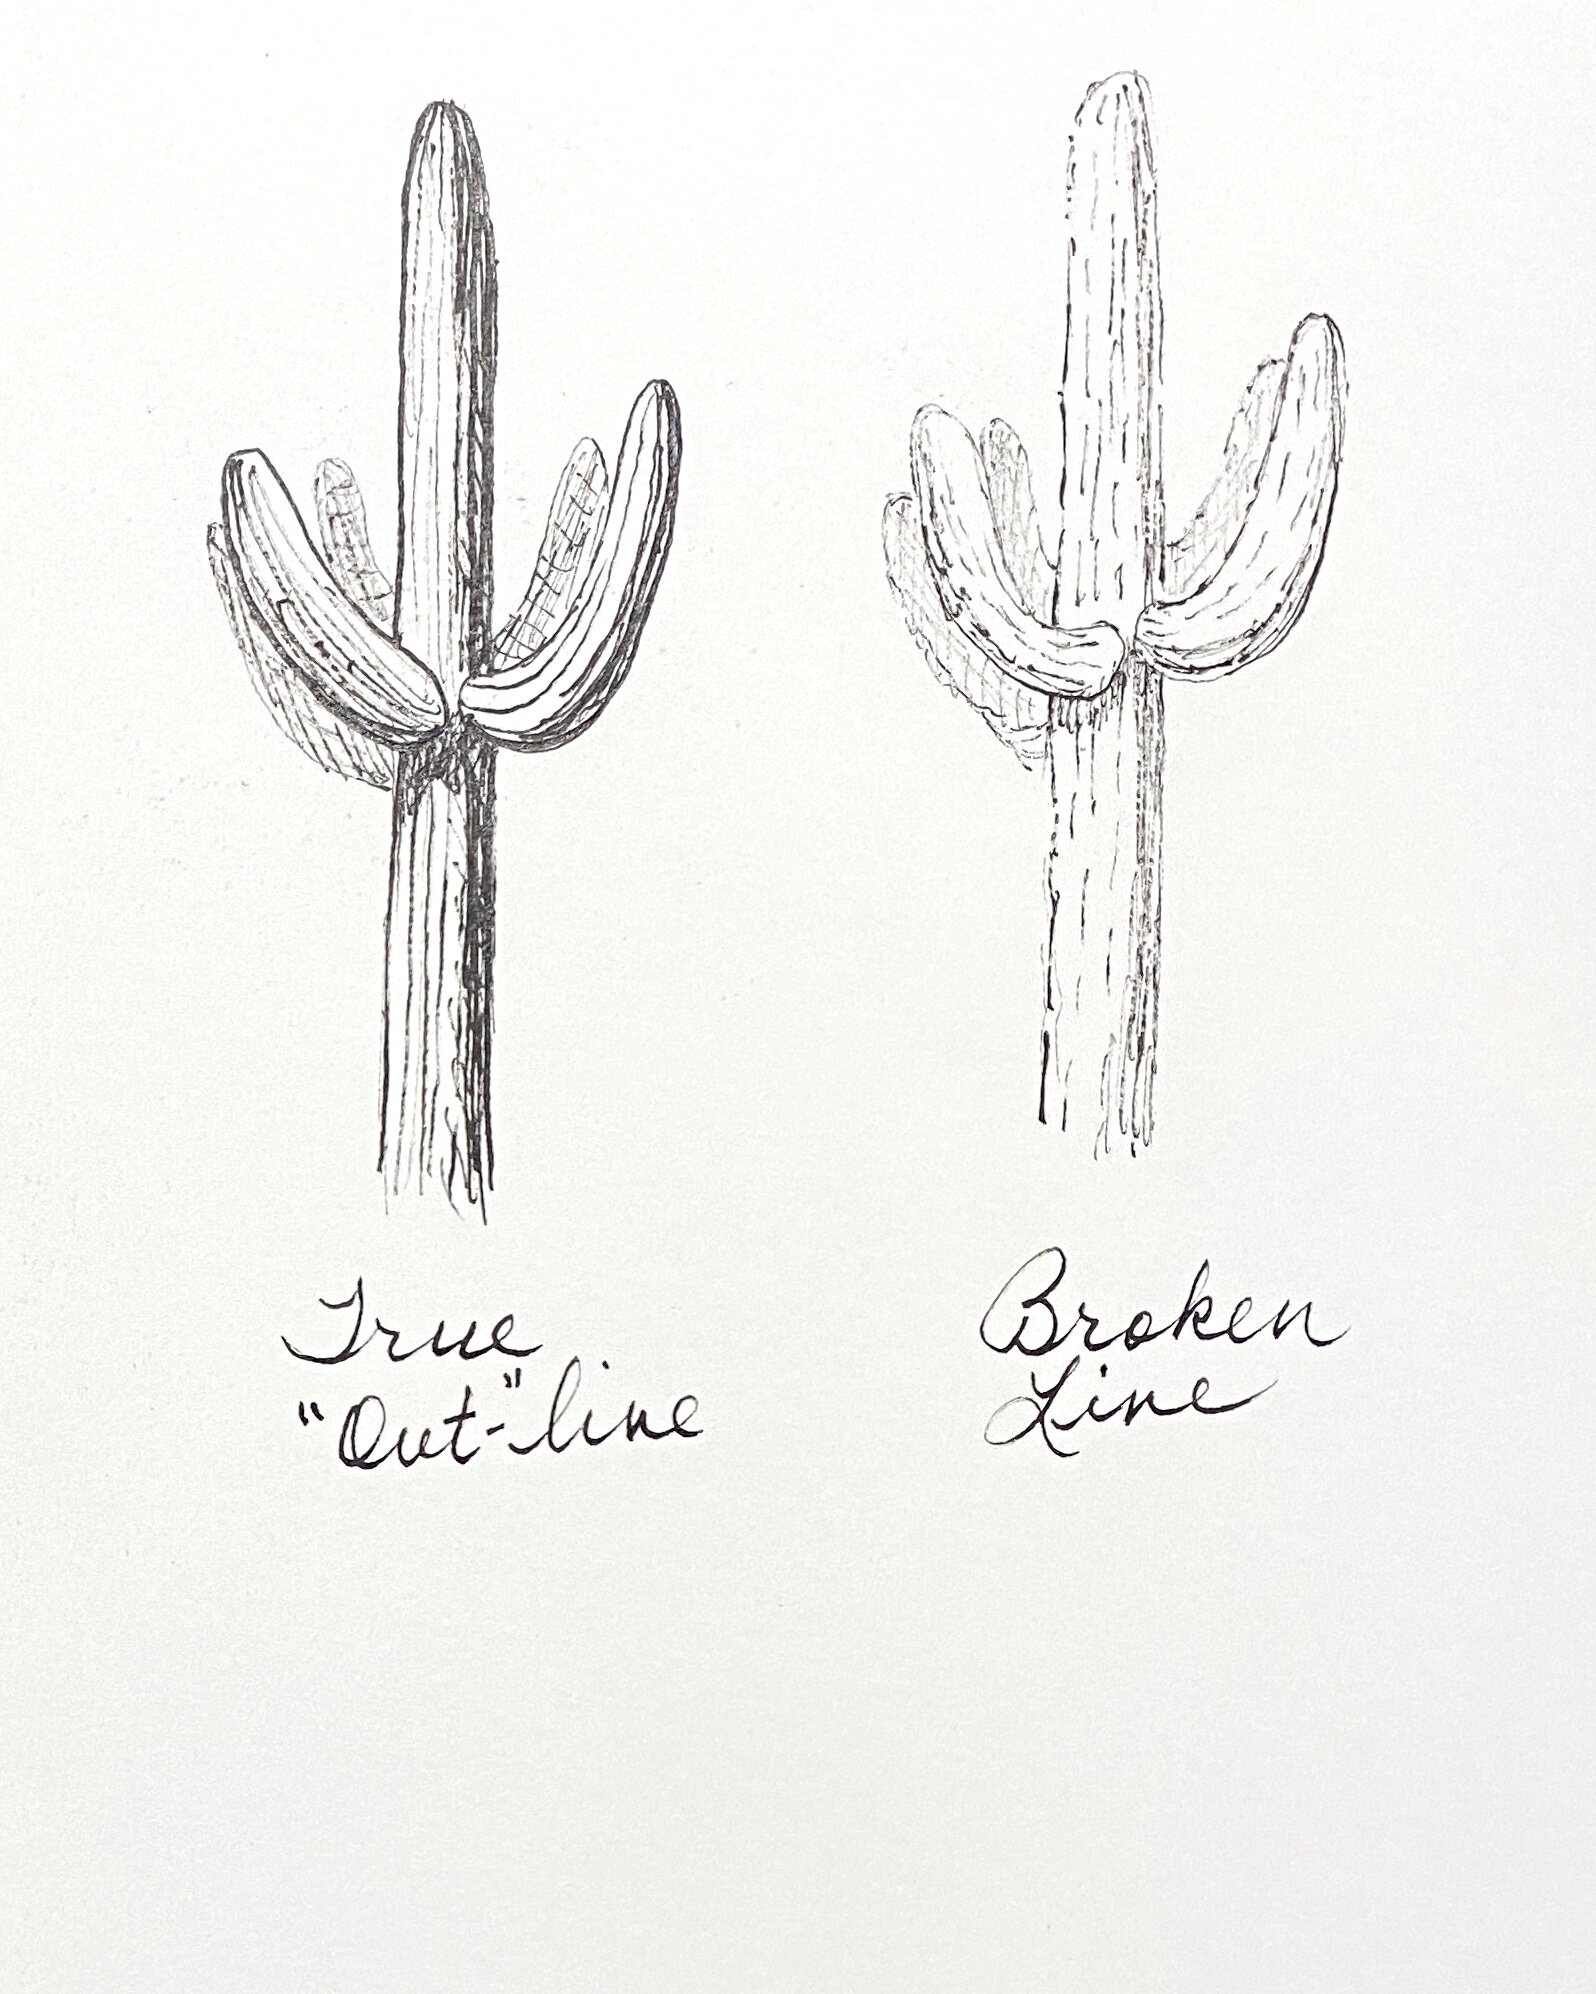 Roseann's sample "True Out-line" and "Broken Line" sketches